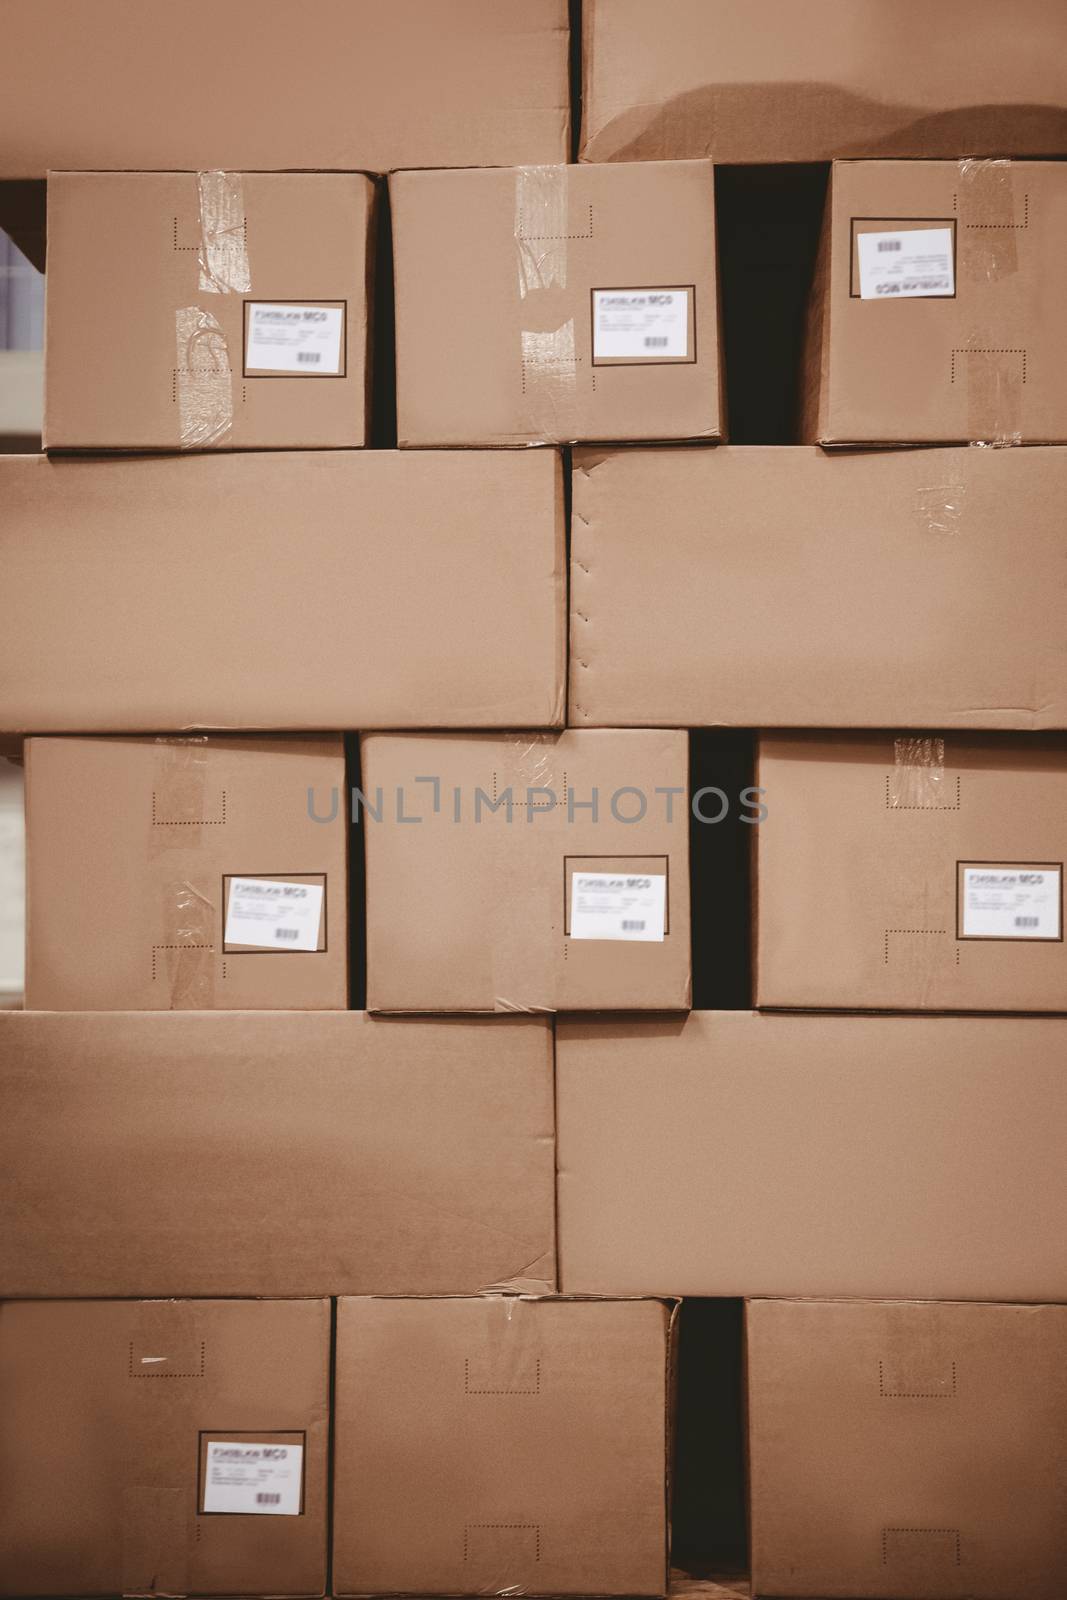 Detail shot of cardboard boxes in warehouse